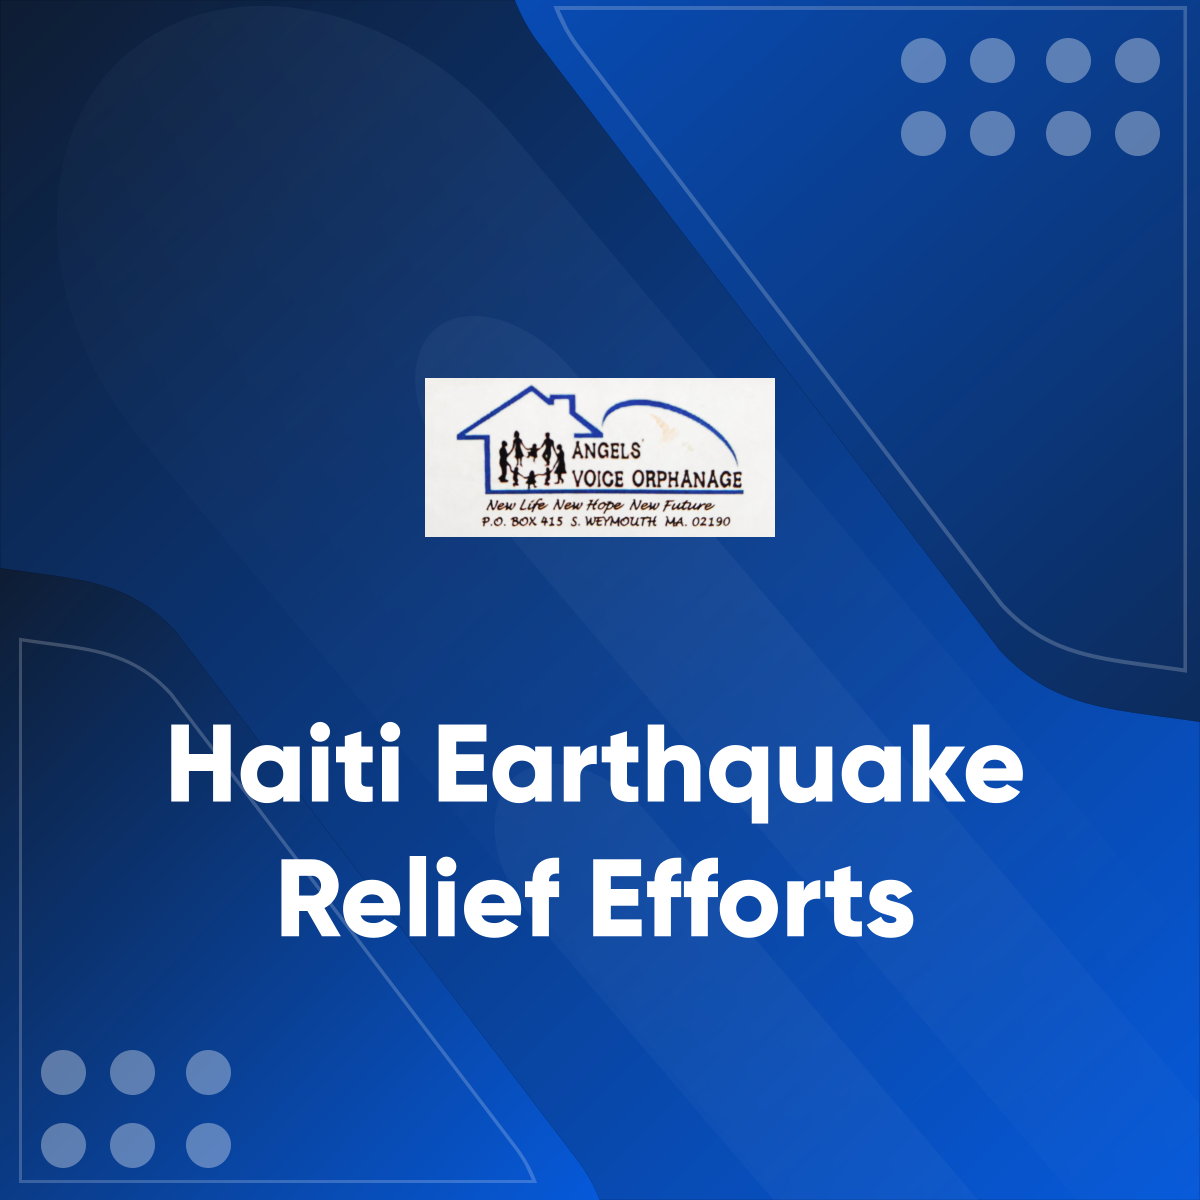 The 7.2 magnitude earthquake that hit Haiti on August 14, 2021, left 1,300 people dead. It also caused severe damage to homes, bridges, hospitals, roads, ports, etc. 

Read more: instagram.com/p/CraMQFbhWtb/…

#HaitiEarthquake #ReliefEfforts #CharityOrganization #SouthWeymouthMA